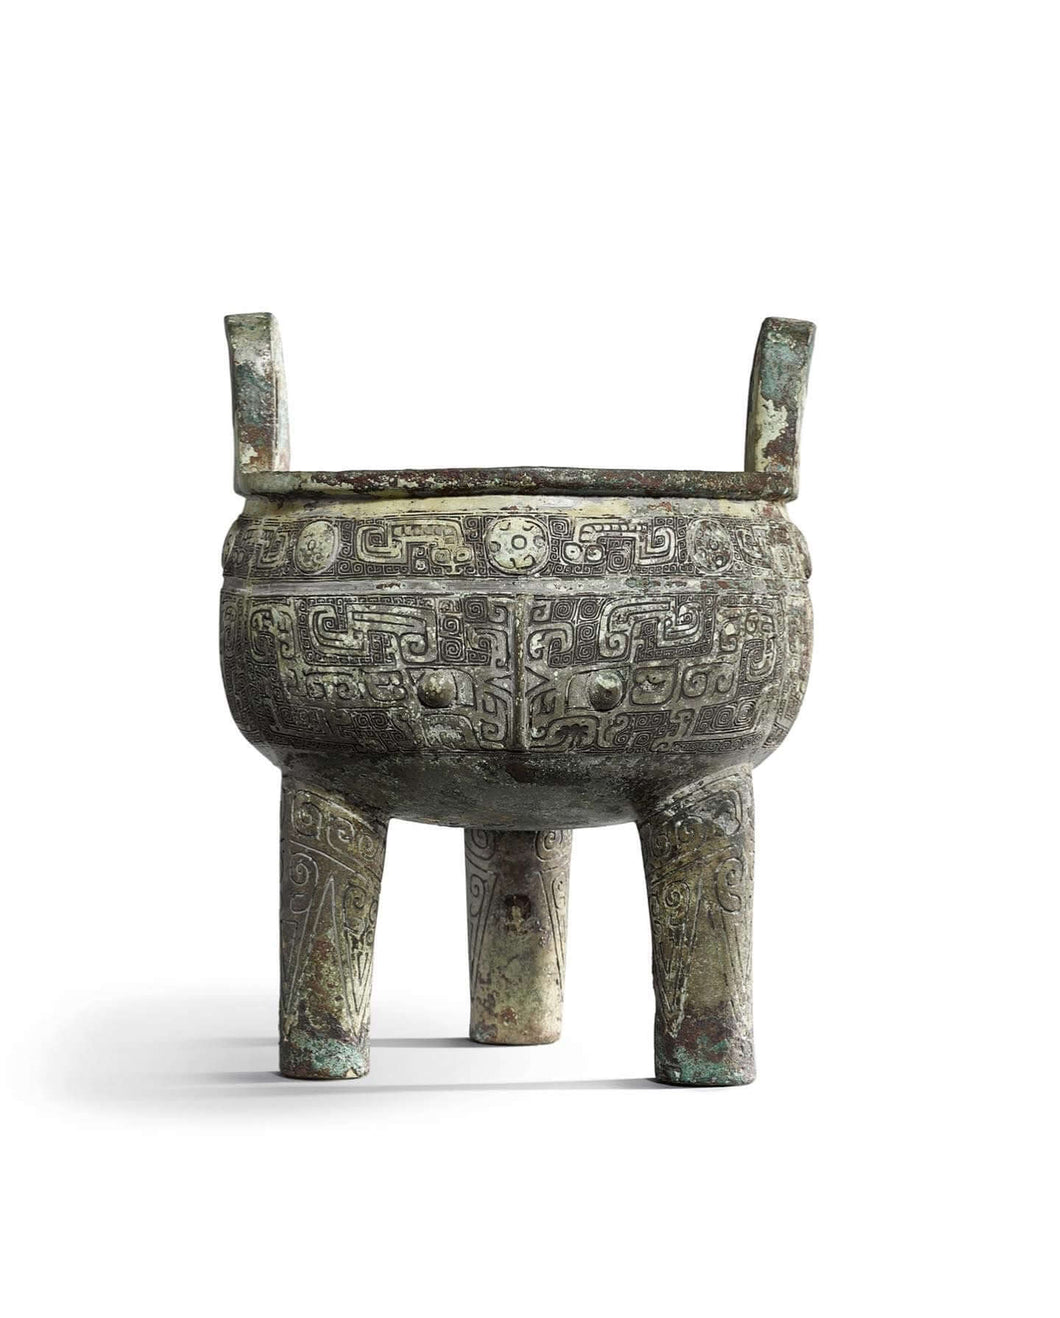 An important inscribed archaic ritual bronze food vessel (Ding)